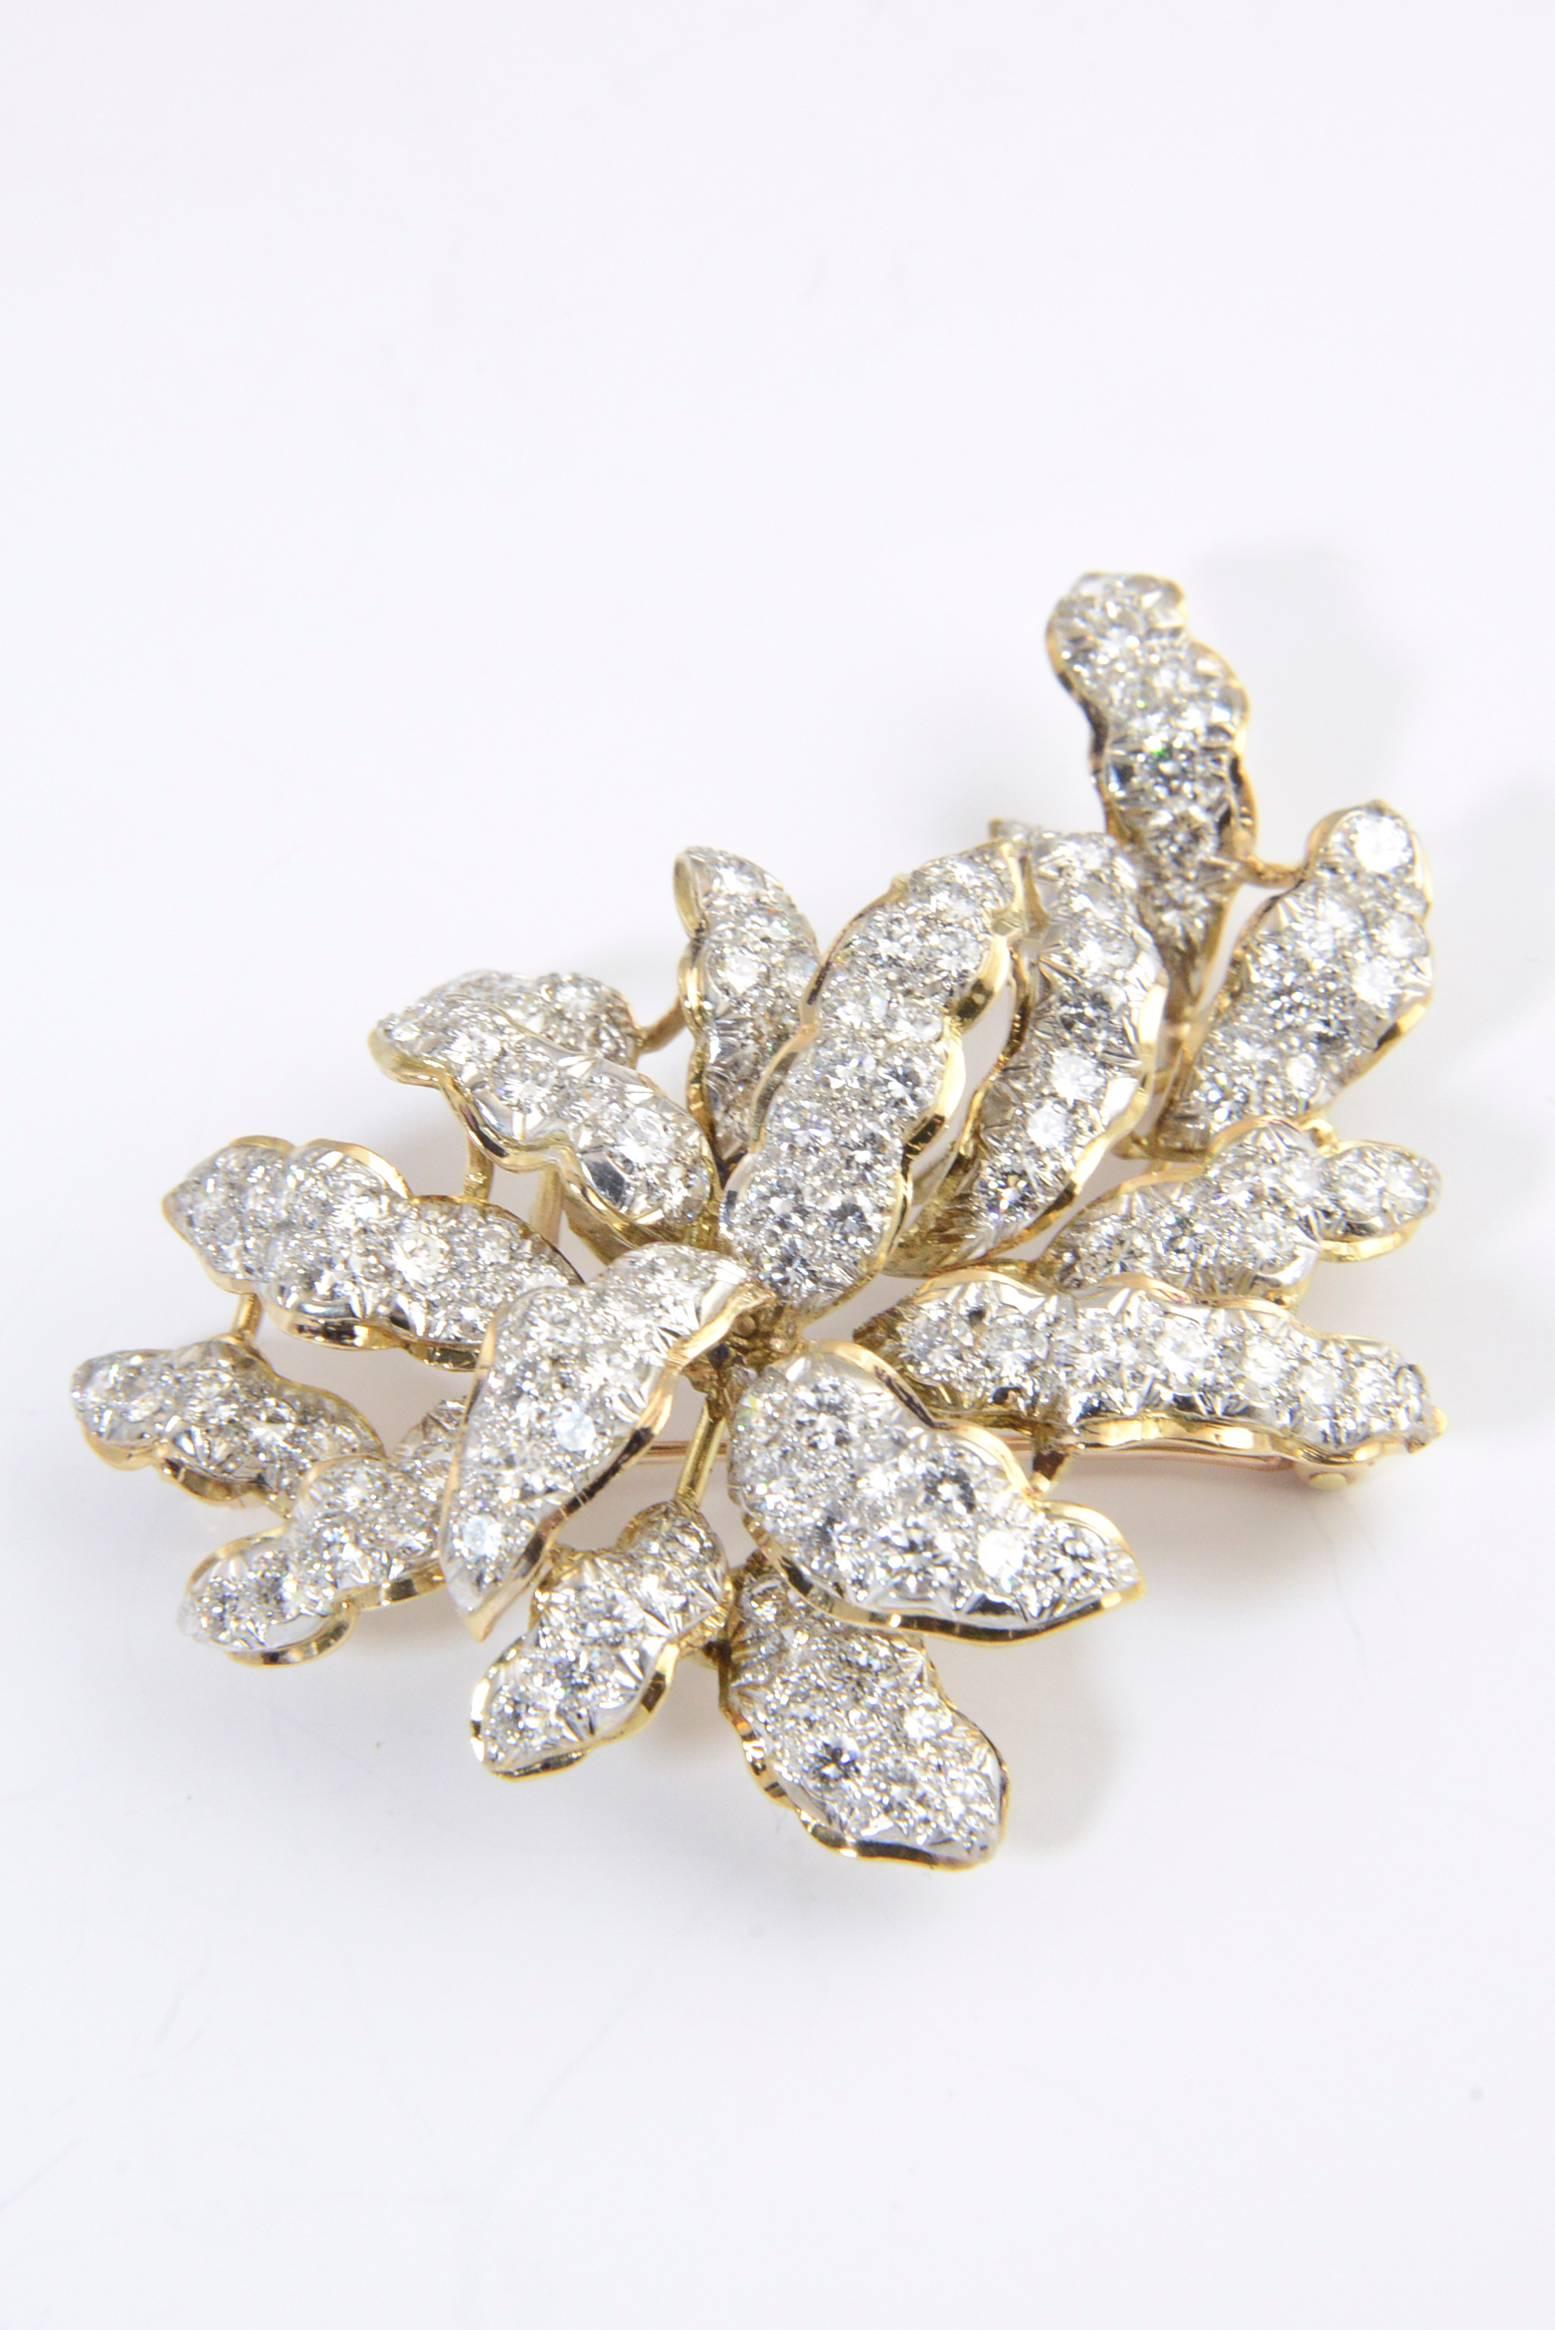 Impressive pavé diamond leaf brooch made of 18K yellow and white gold, circa 1960 -1970's. This three-dimensional brooch contains just under 8 carats in diamonds.